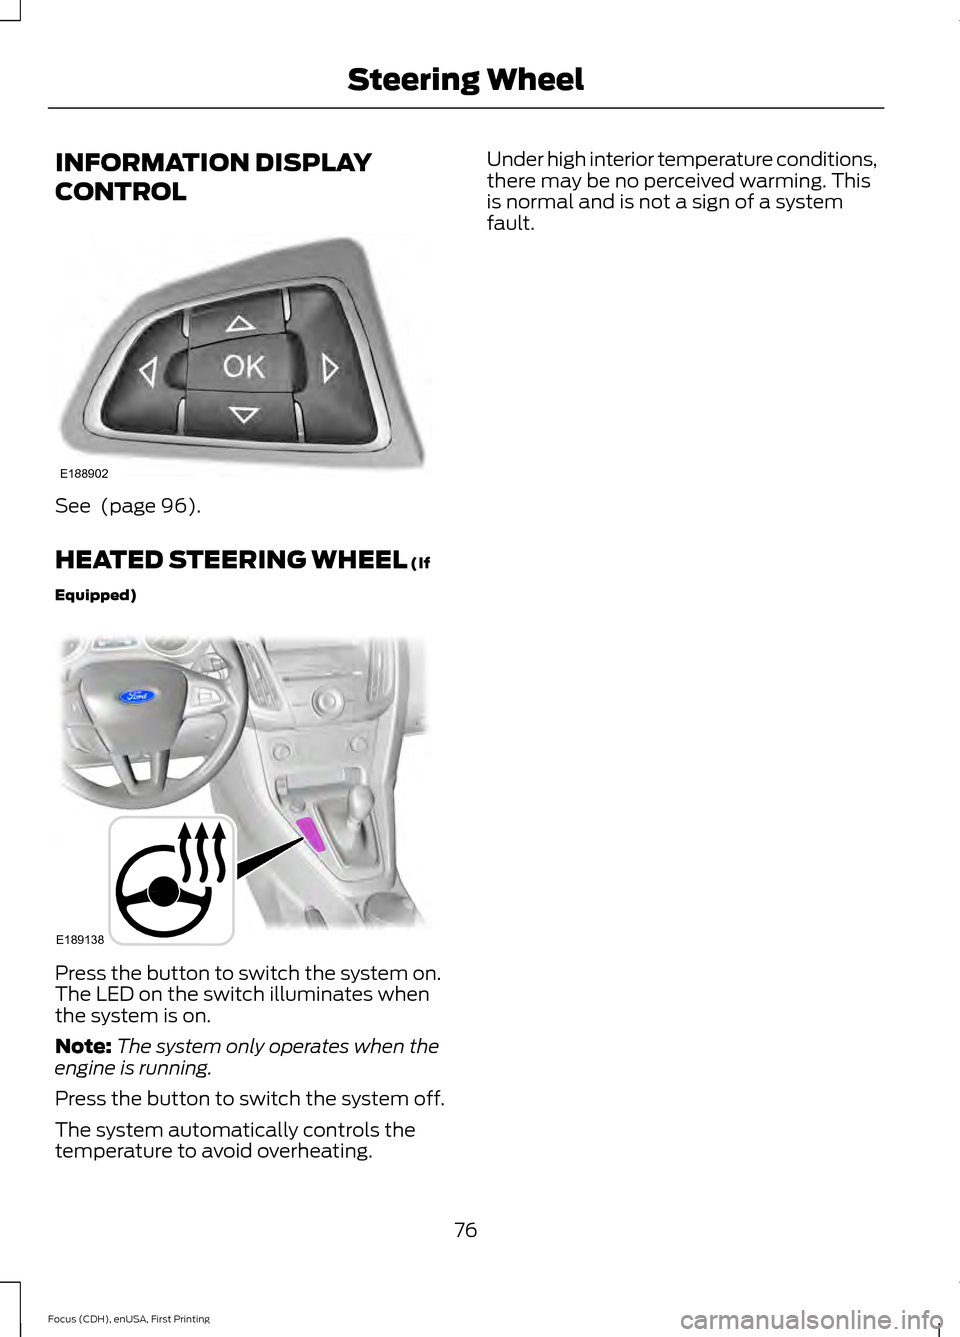 FORD FOCUS 2015 3.G Owners Manual INFORMATION DISPLAY
CONTROL
See  (page 96).
HEATED STEERING WHEEL
 (If
Equipped) Press the button to switch the system on.
The LED on the switch illuminates when
the system is on.
Note:
The system onl